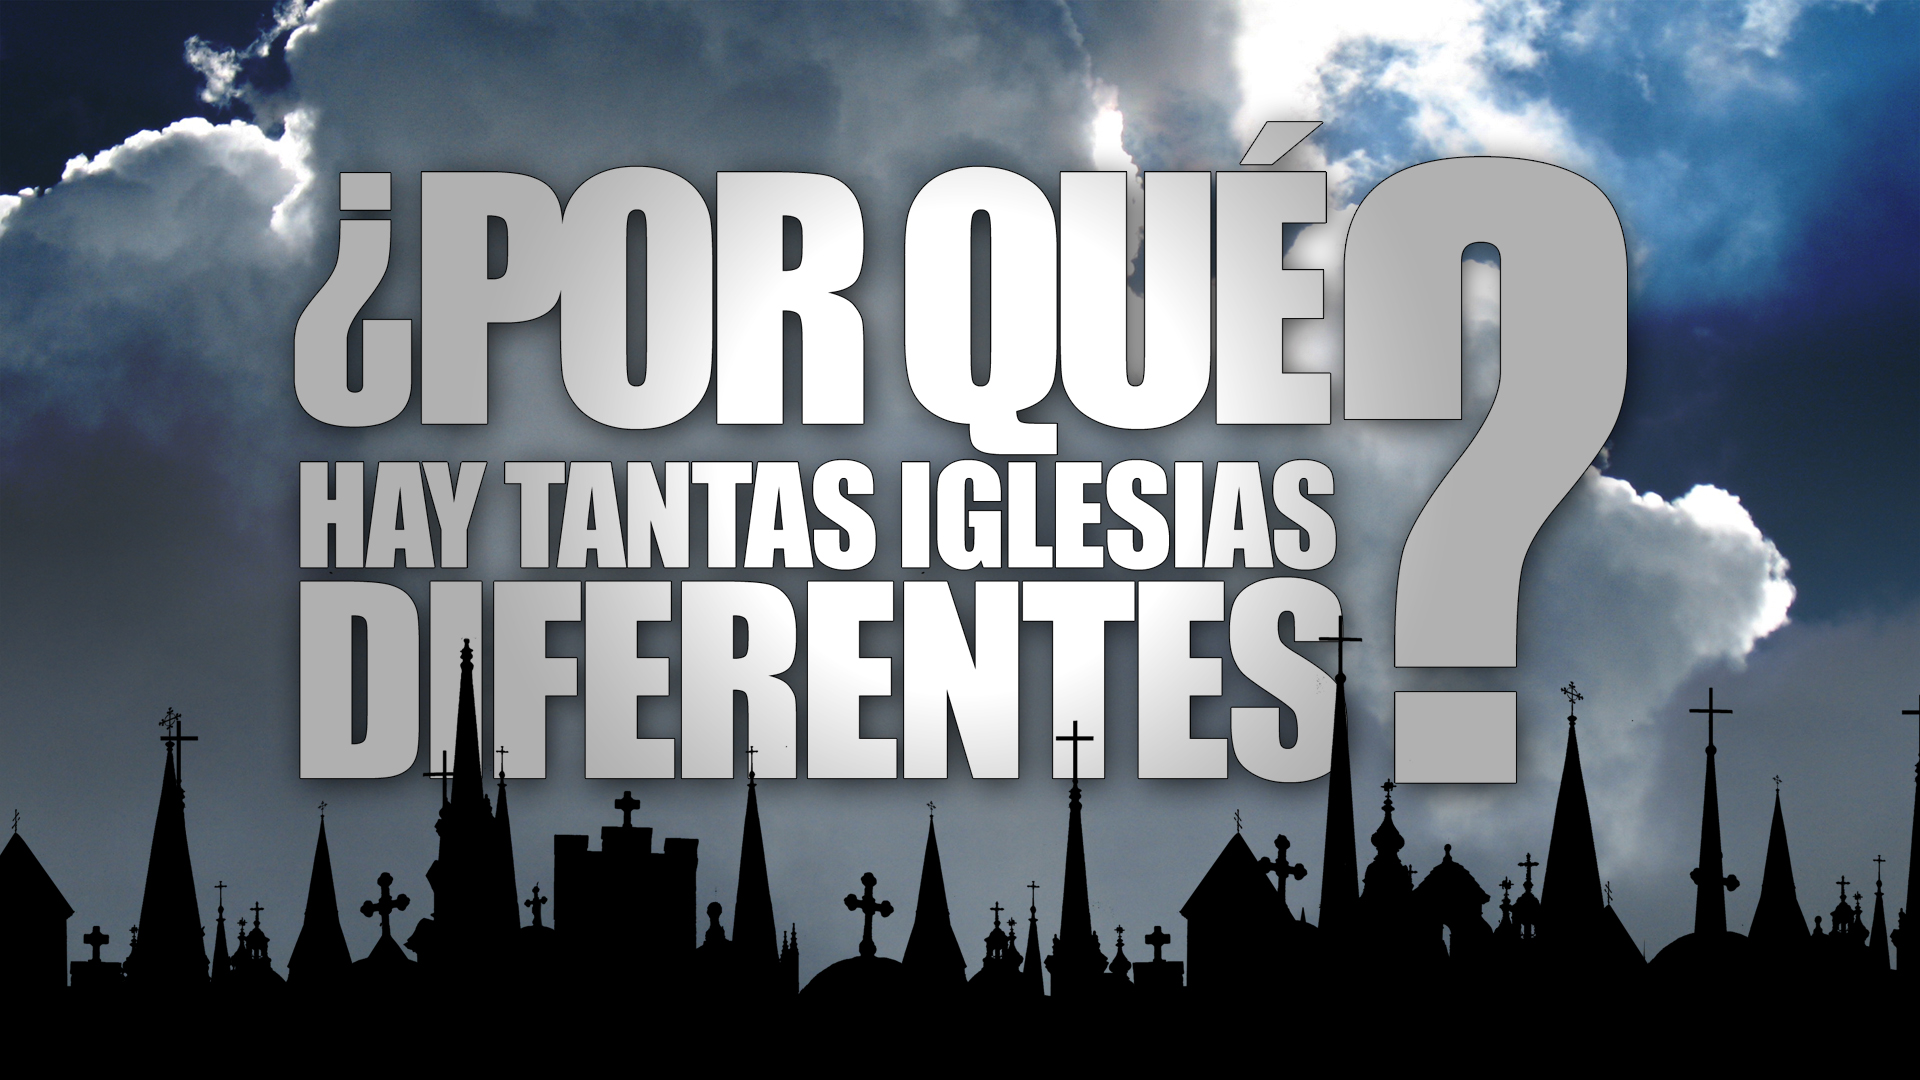 ¿Por Qué Hay Tantas Iglesias? (Why Are There So Many Churches?) - Spanish Version